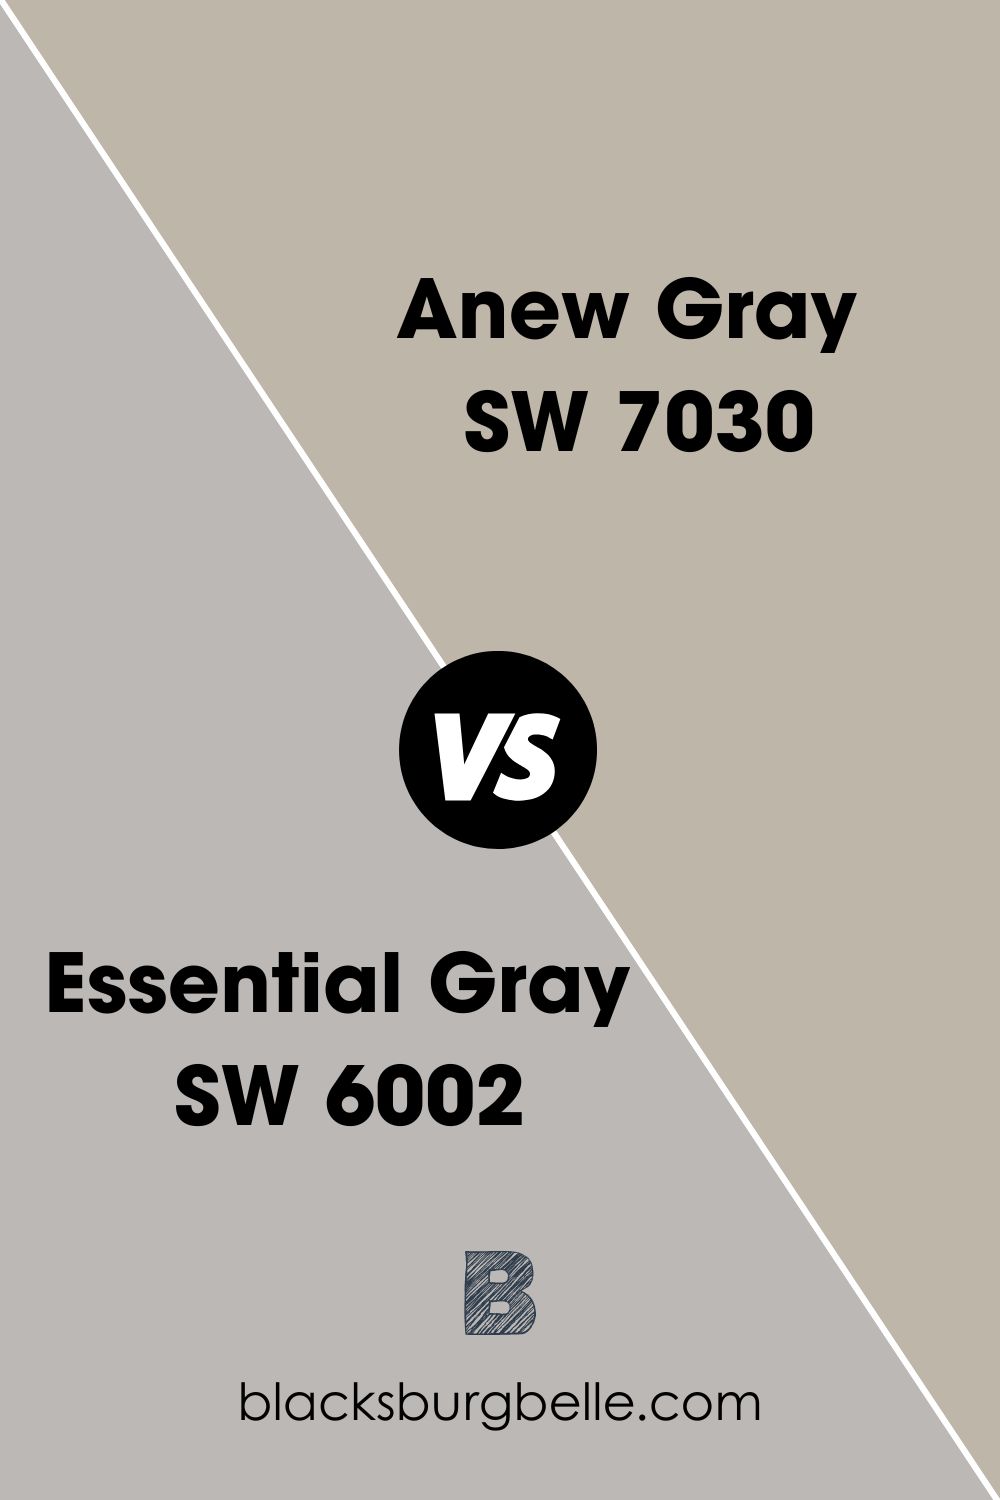 Anew Gray SW 7030